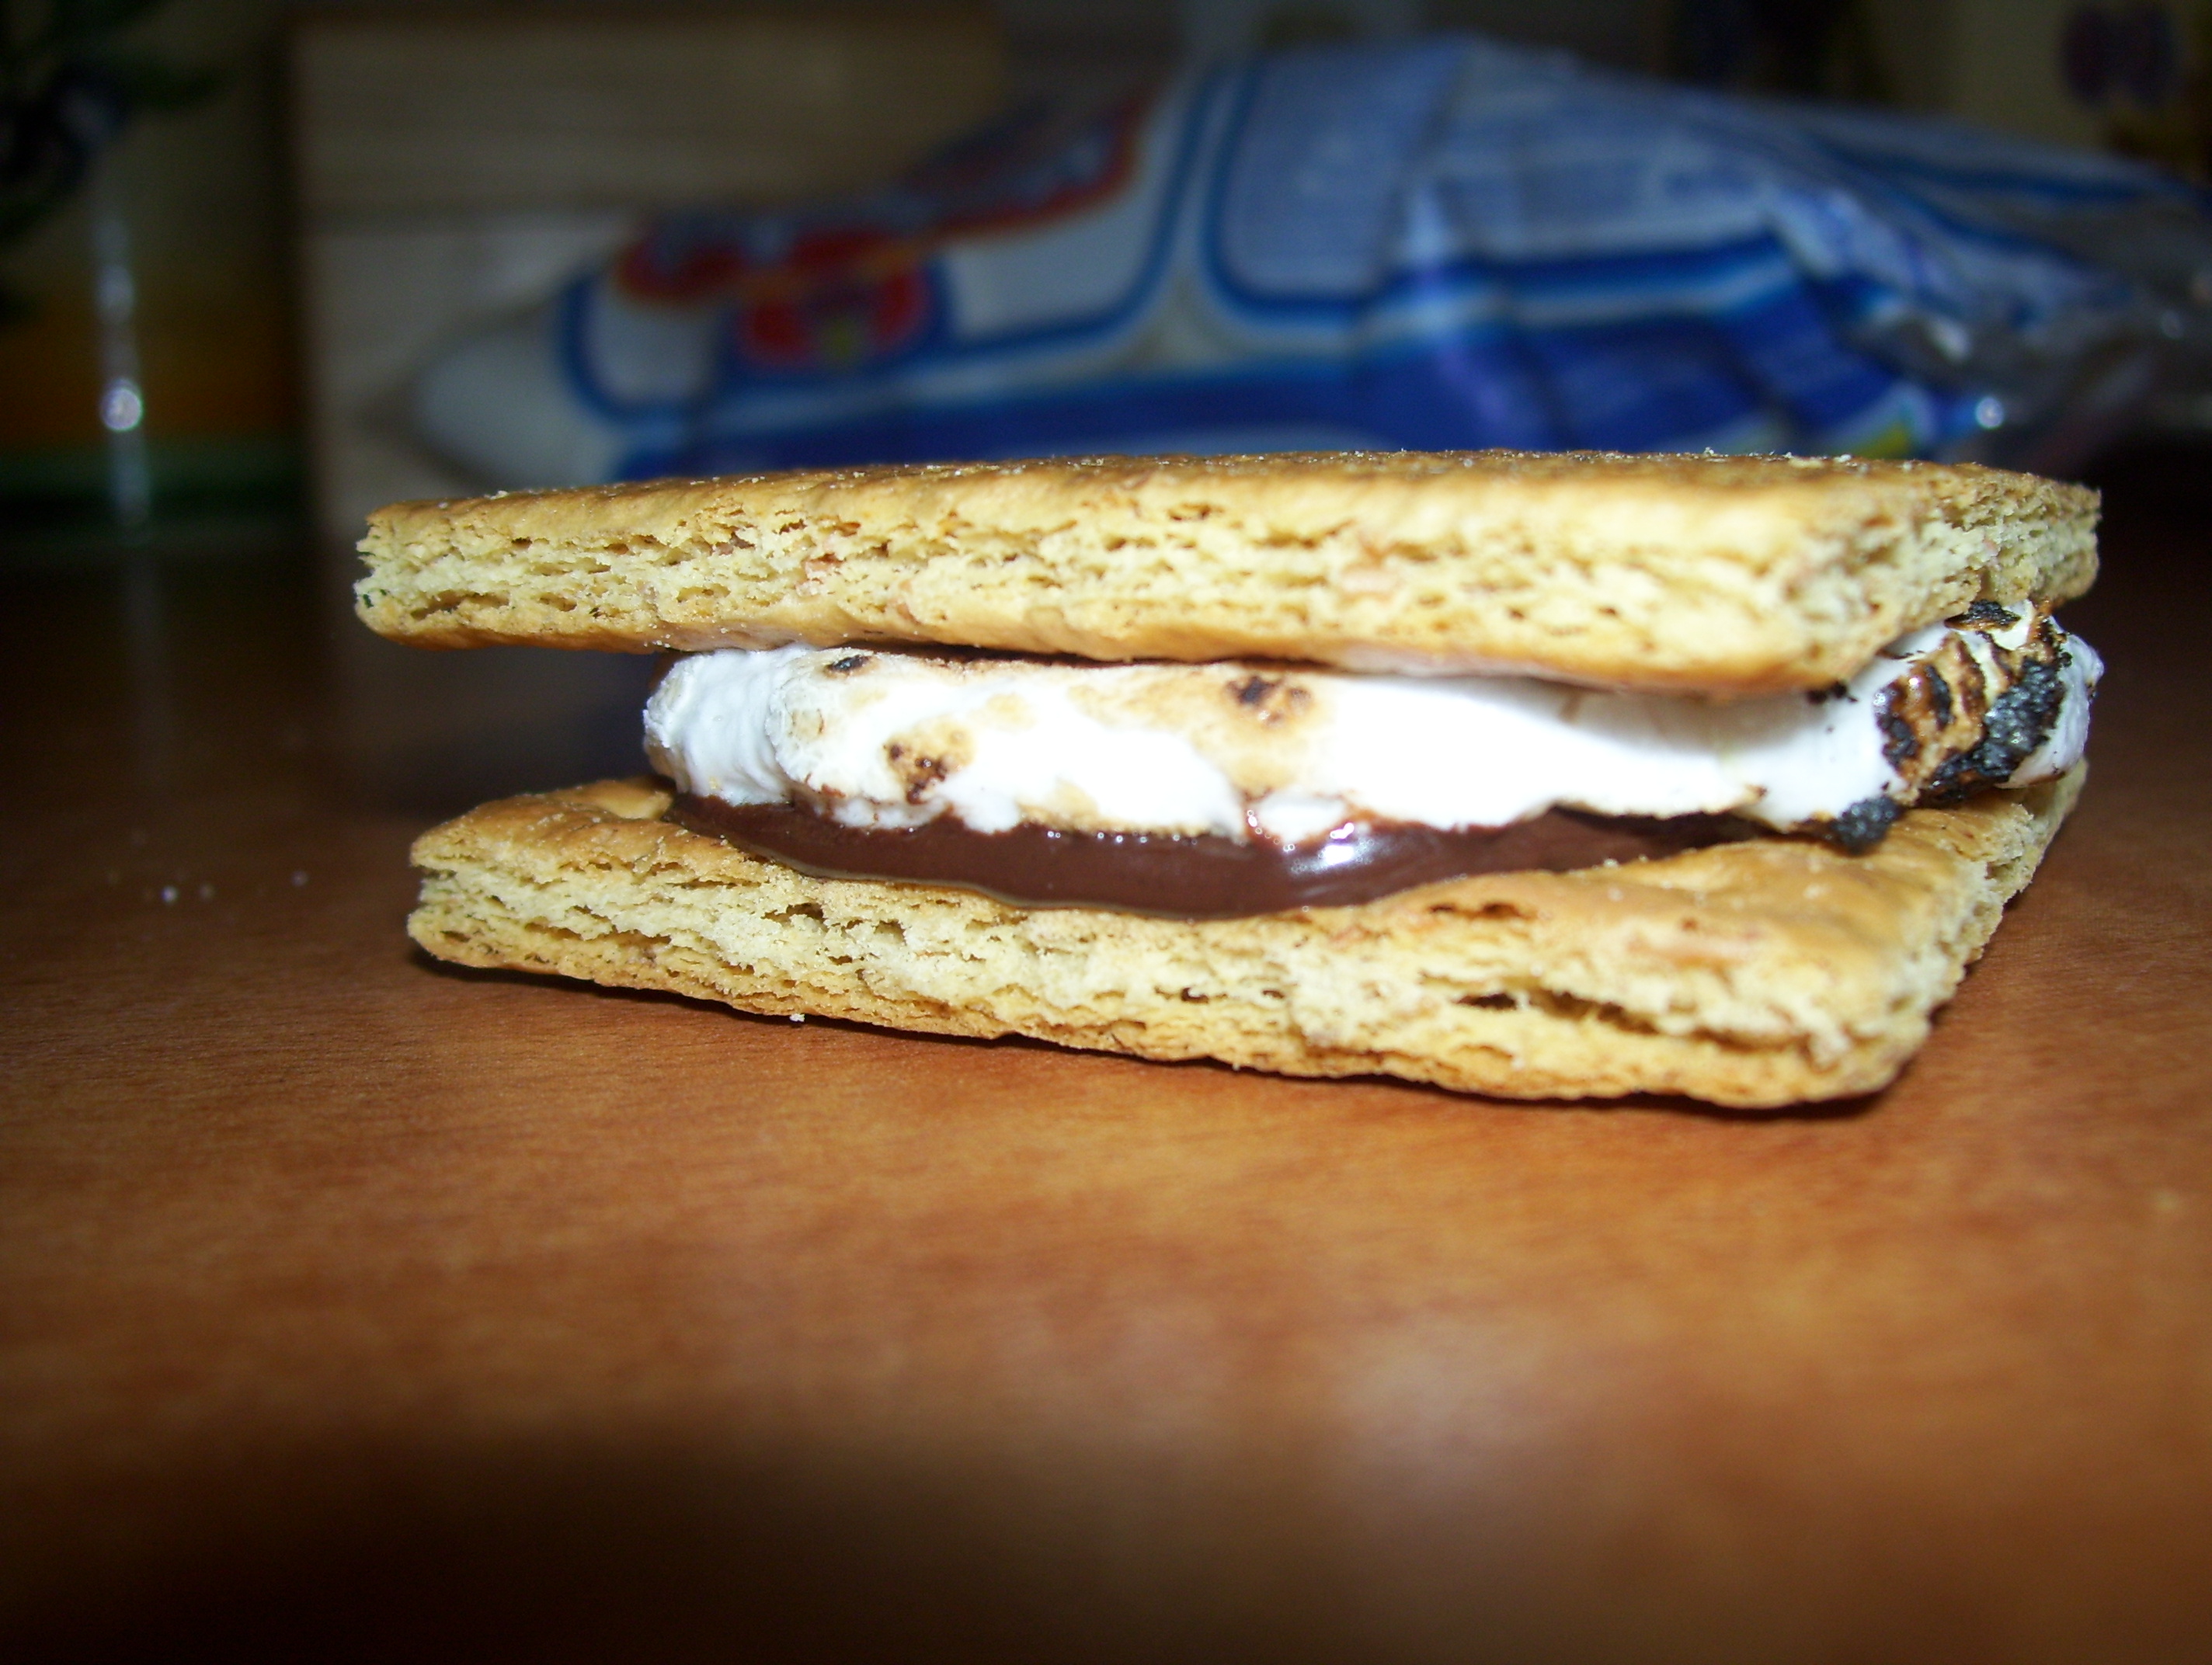 S'mores 2.0